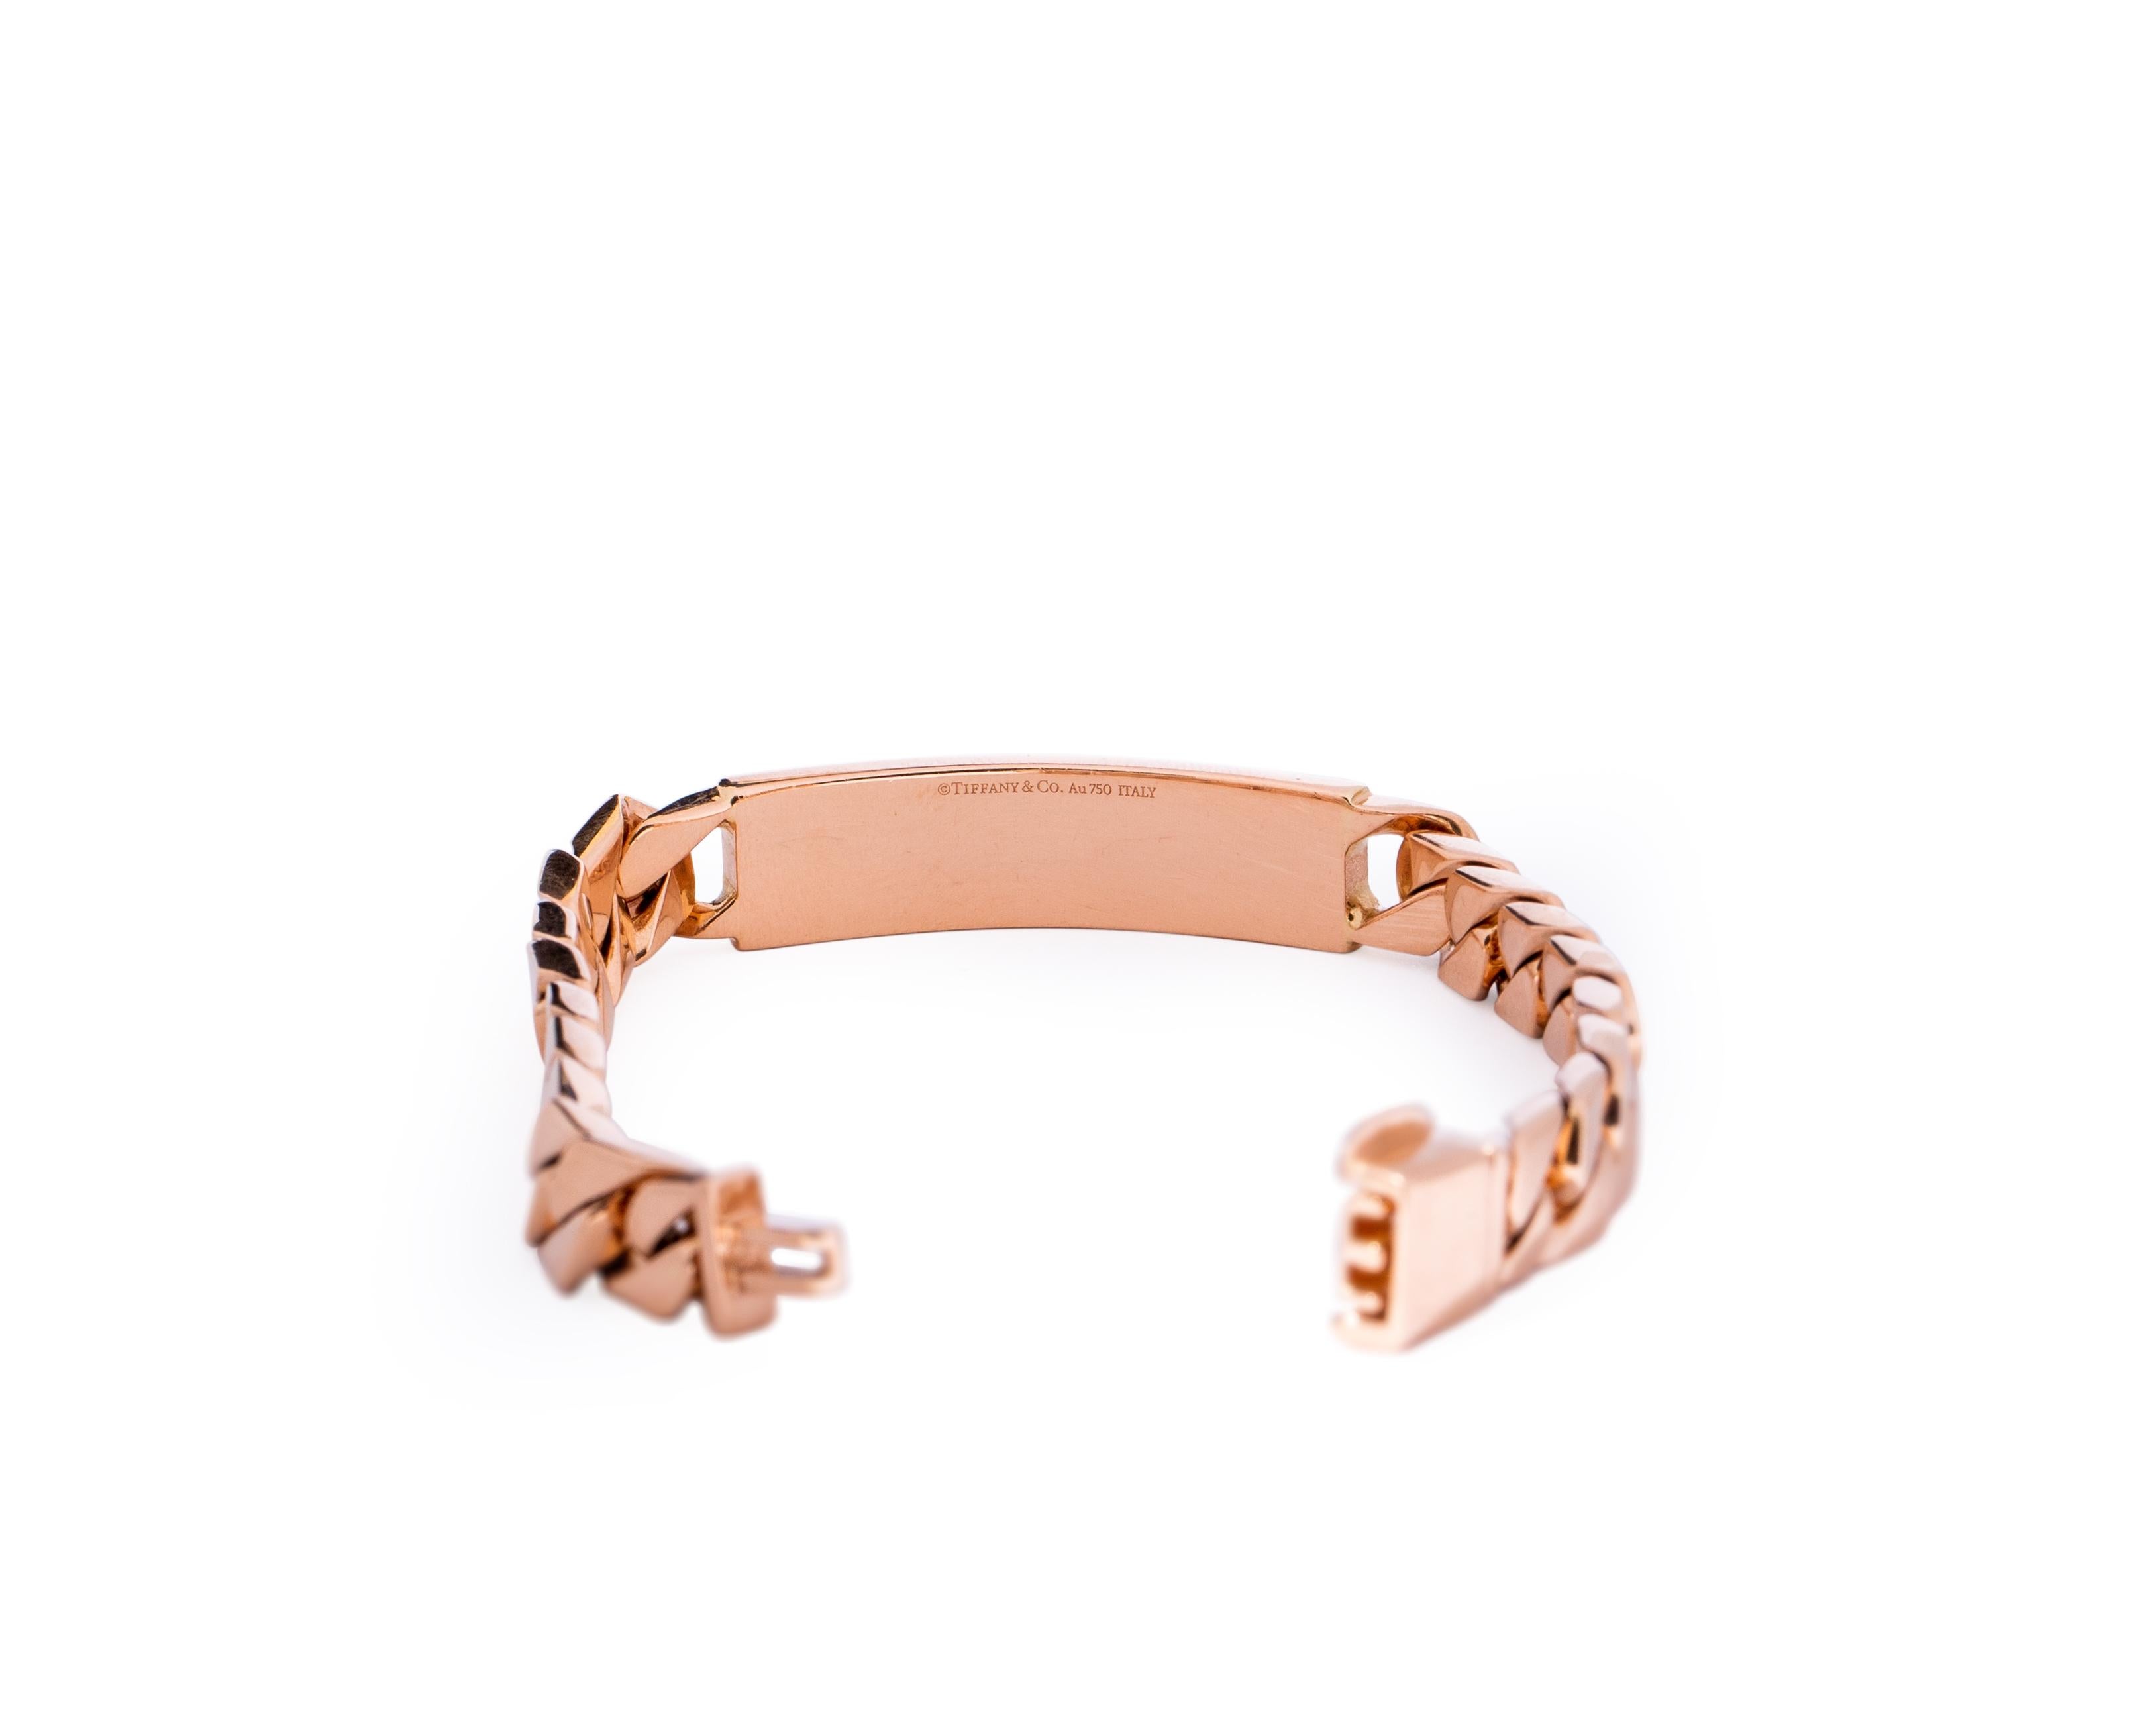 Unique Tiffany & Co. Item from 1990s - it is an ID Cuban Bracelet crafted in 18 karat rose gold. It is absolutely stunning! Made in Italy, and features a standard clasp.

Item Details:
Metal Type: 18 Karat Rose Gold
Weight: 68.56 grams
Fits an 8